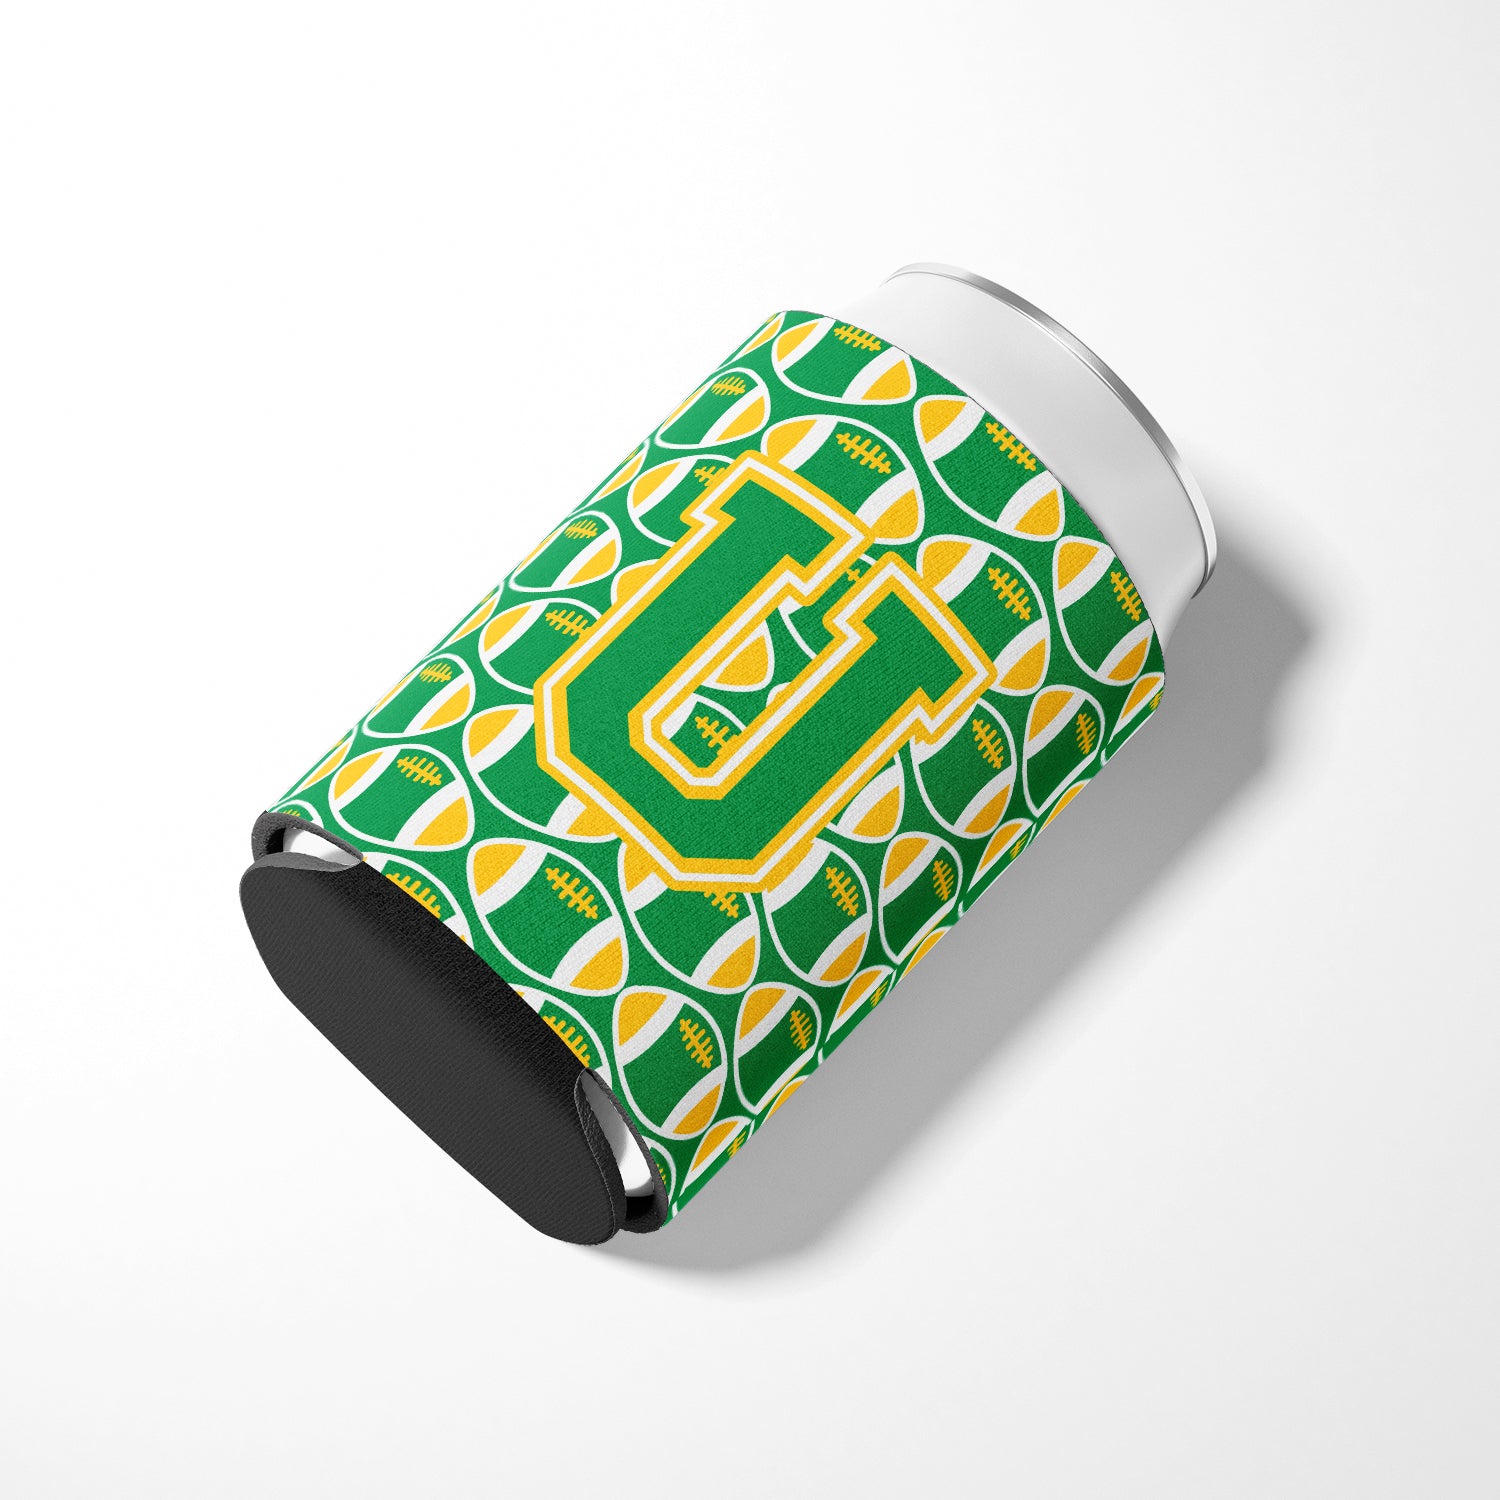 Letter U Football Green and Gold Can or Bottle Hugger CJ1069-UCC.